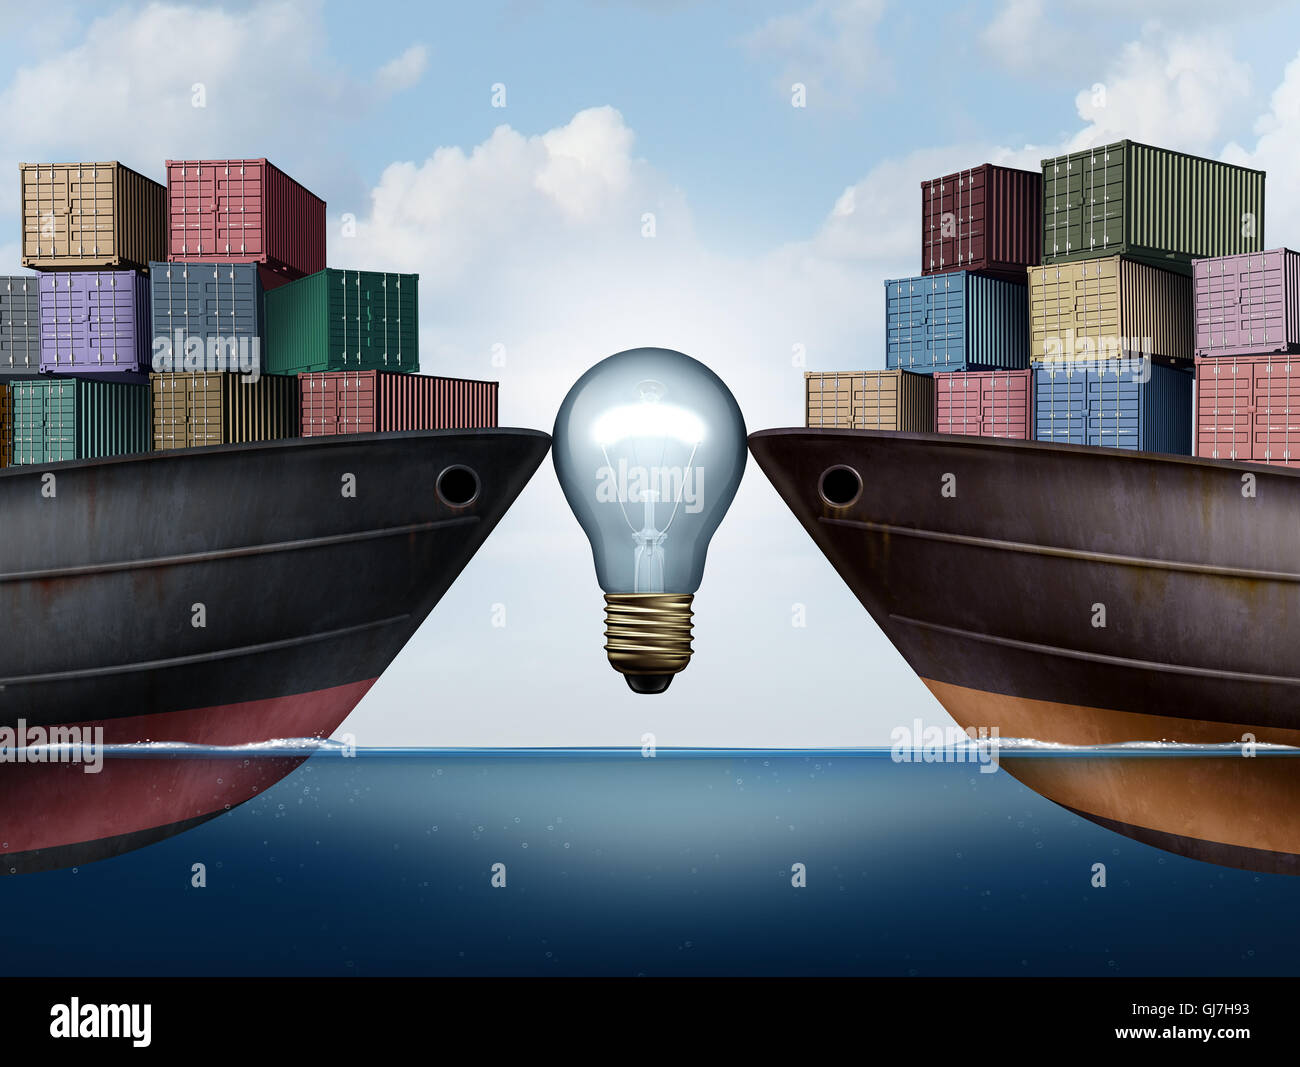 Shipping logistics or trade agreement idea with a lightbulb between two ships carrying cargo freight as a symbol for transport management solutions and export import economic strategies with 3D illustration elements. Stock Photo